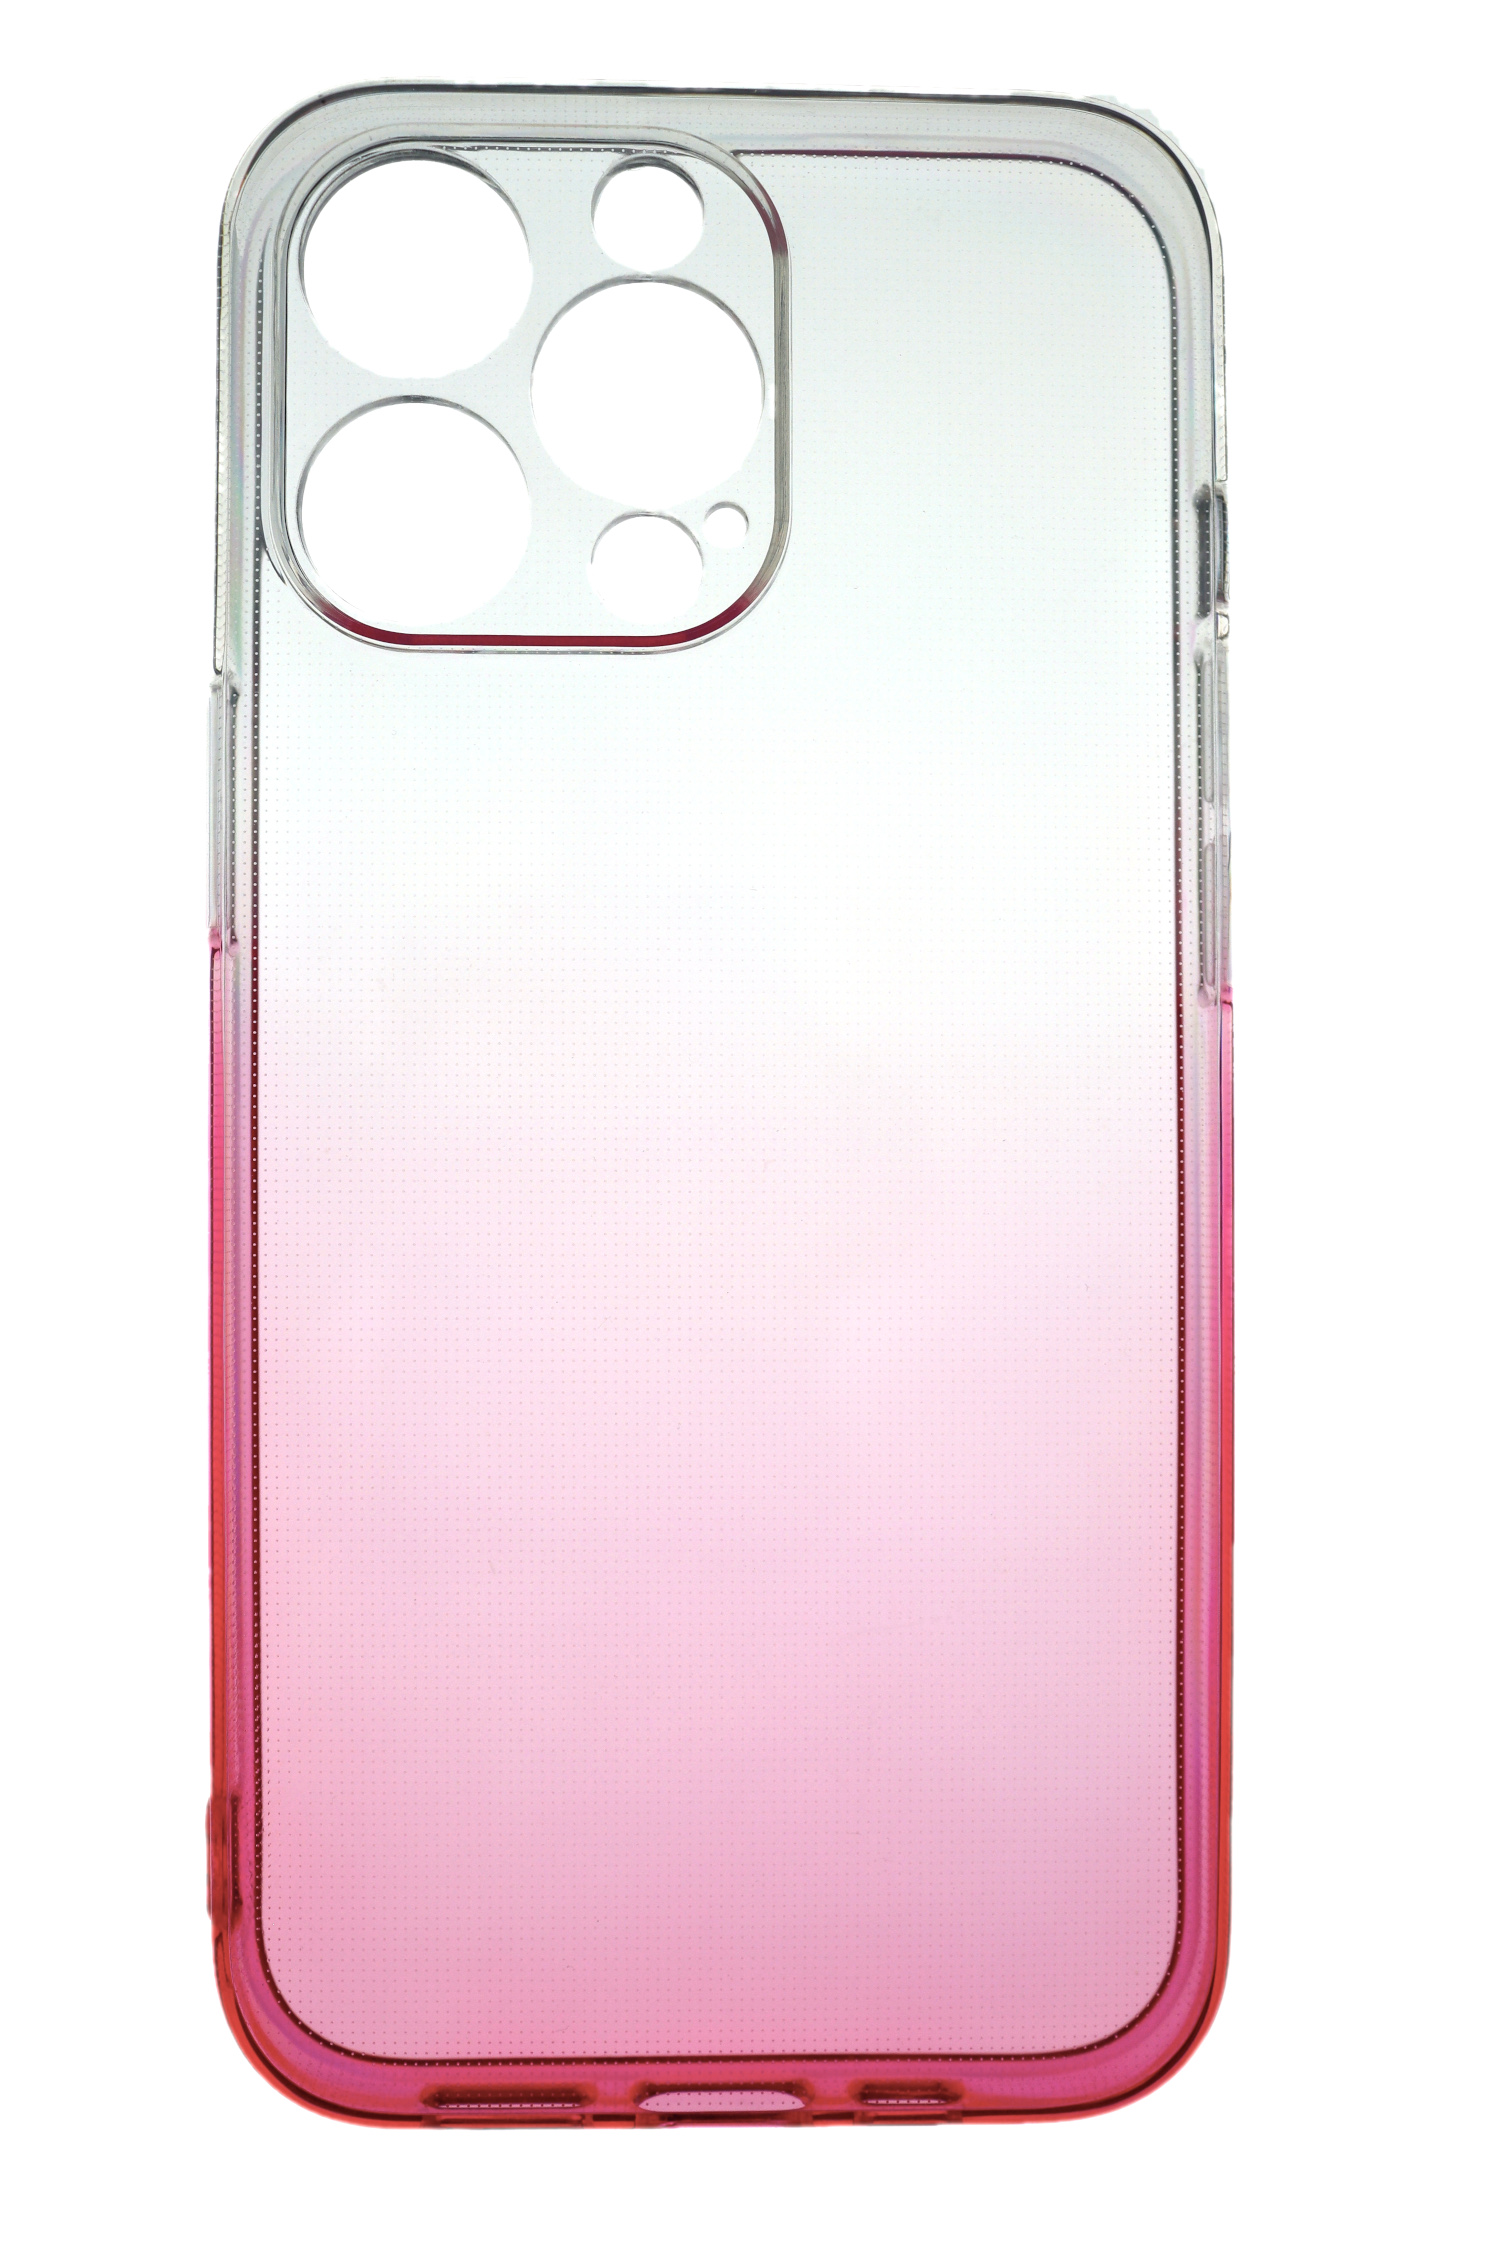 JAMCOVER 2.0 mm Backcover, TPU 13 Apple, Transparent Strong, Case Pink, iPhone Pro Max